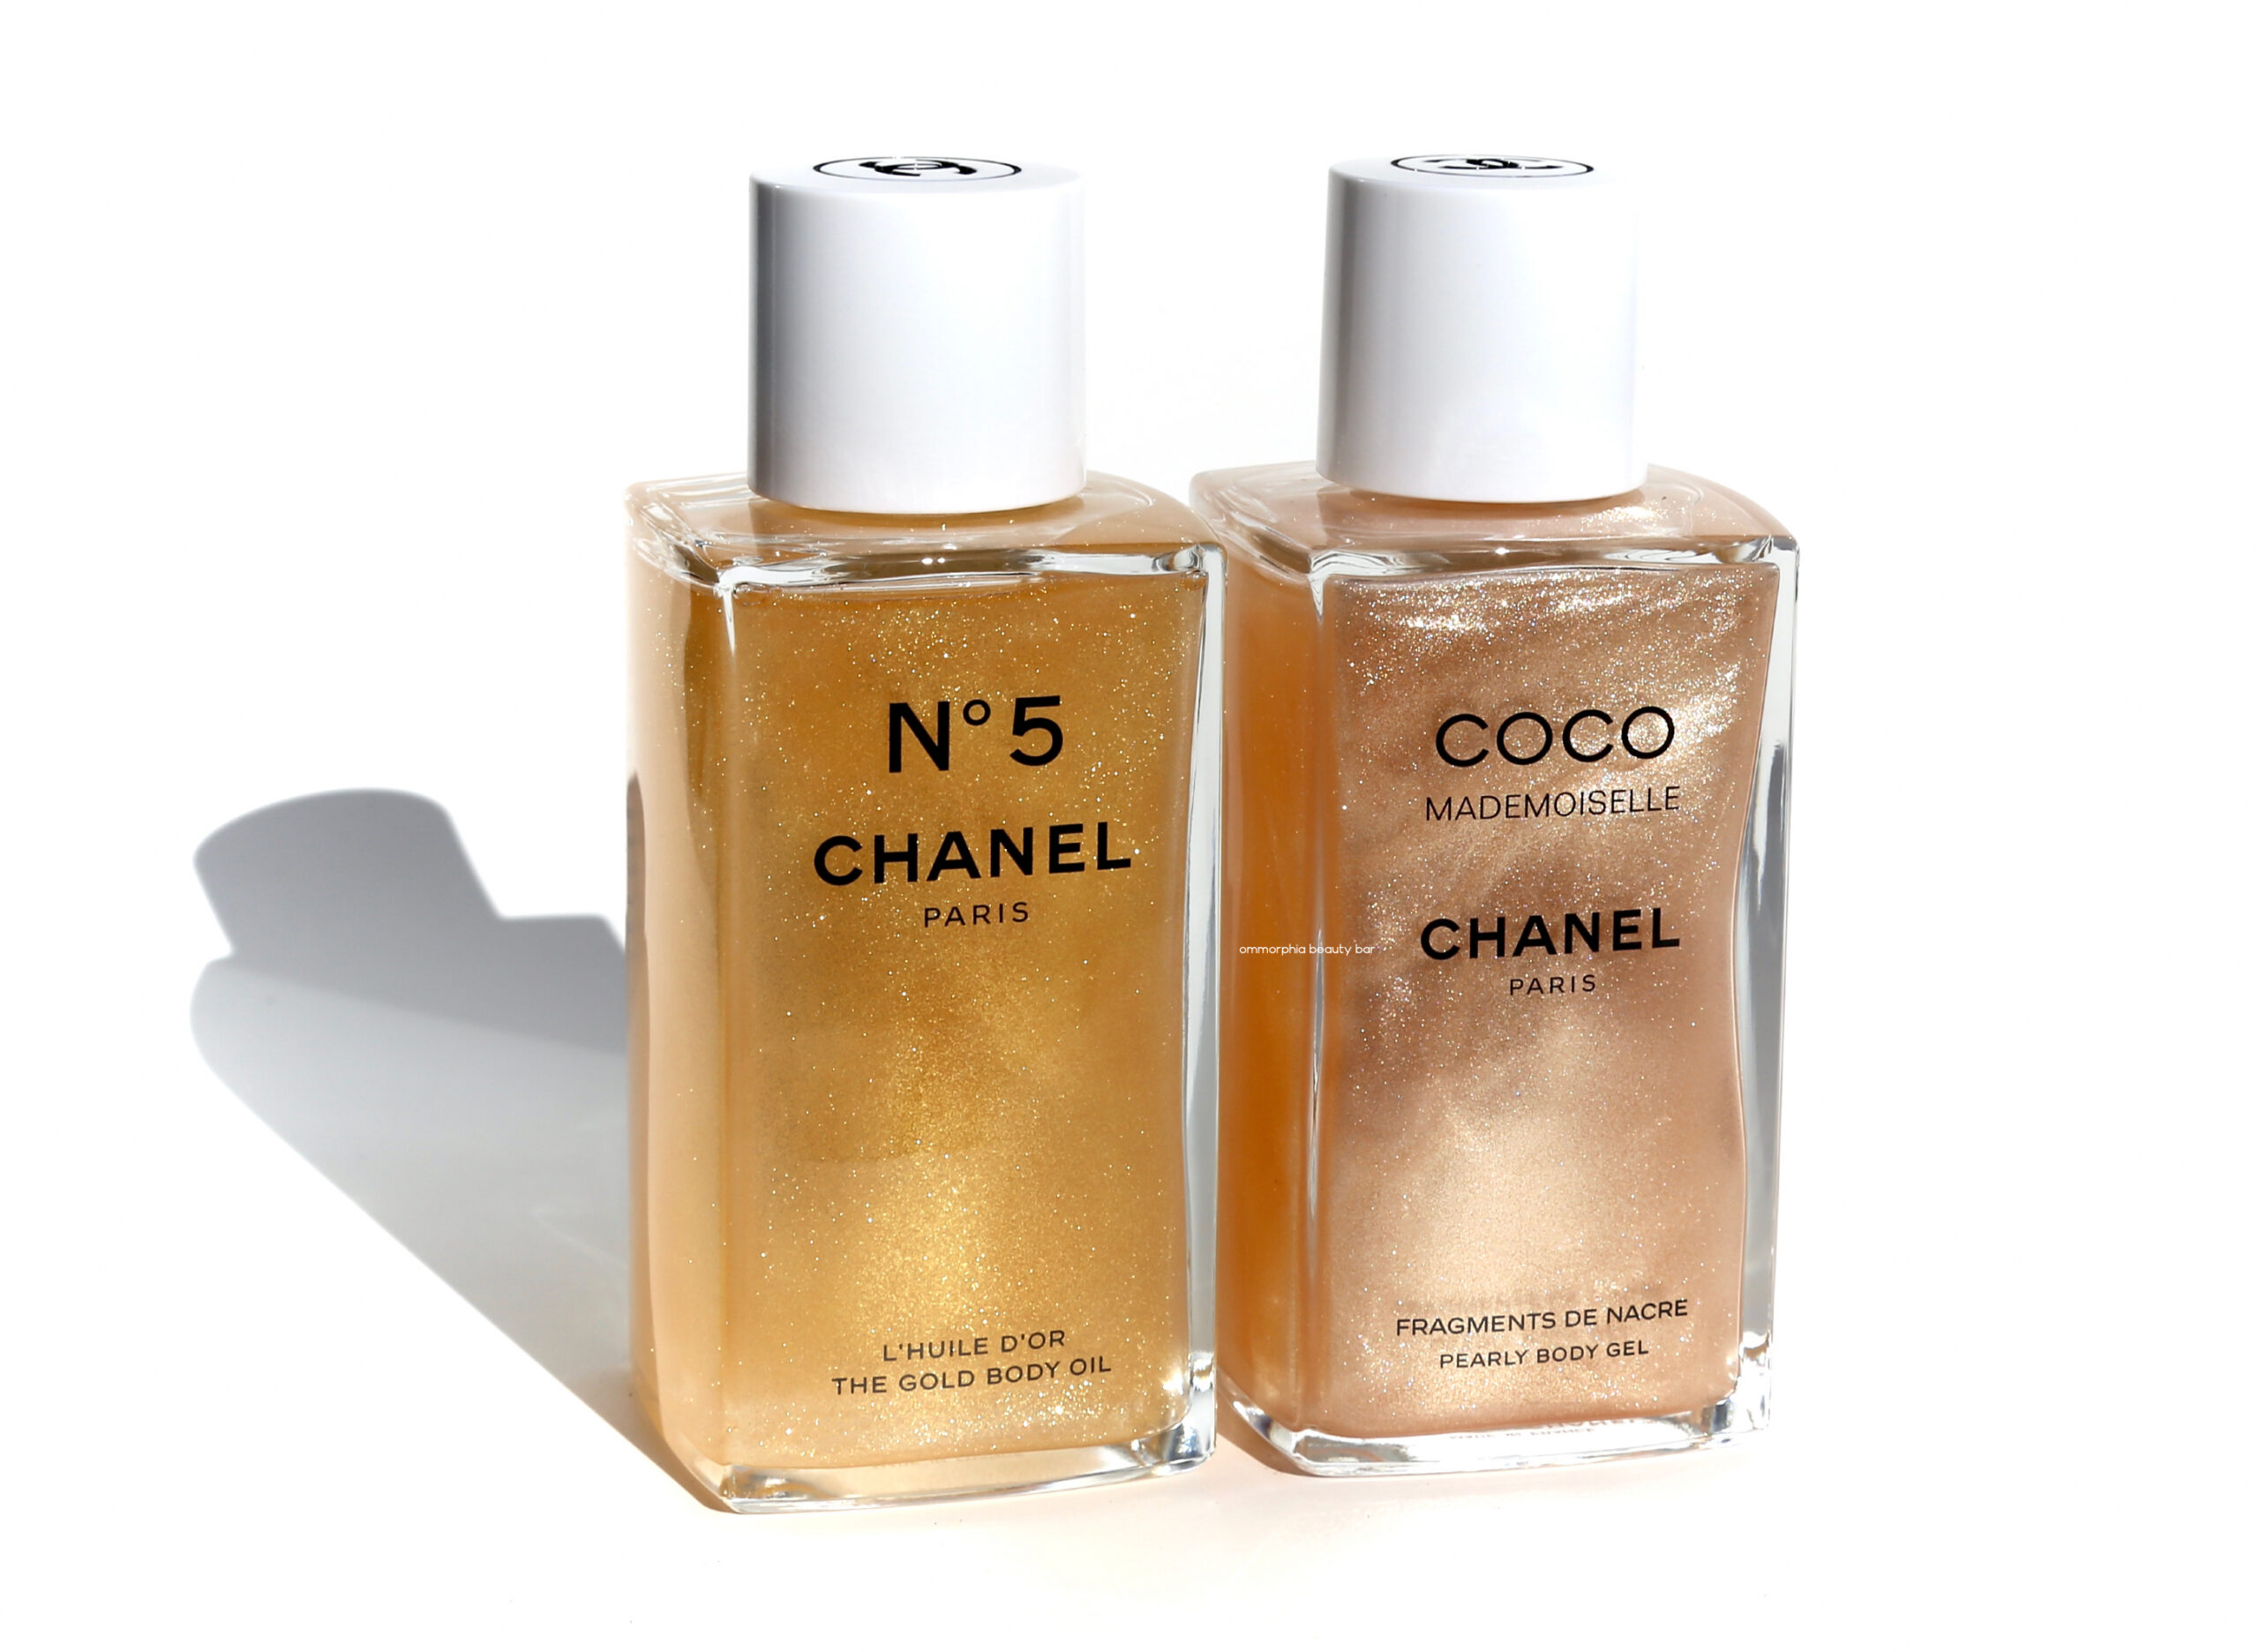 CHANEL · N° 5 The Gold Body Oil & Coco Mademoiselle Pearly Body Gel,  Holiday 2022 | ommorphia beauty bar